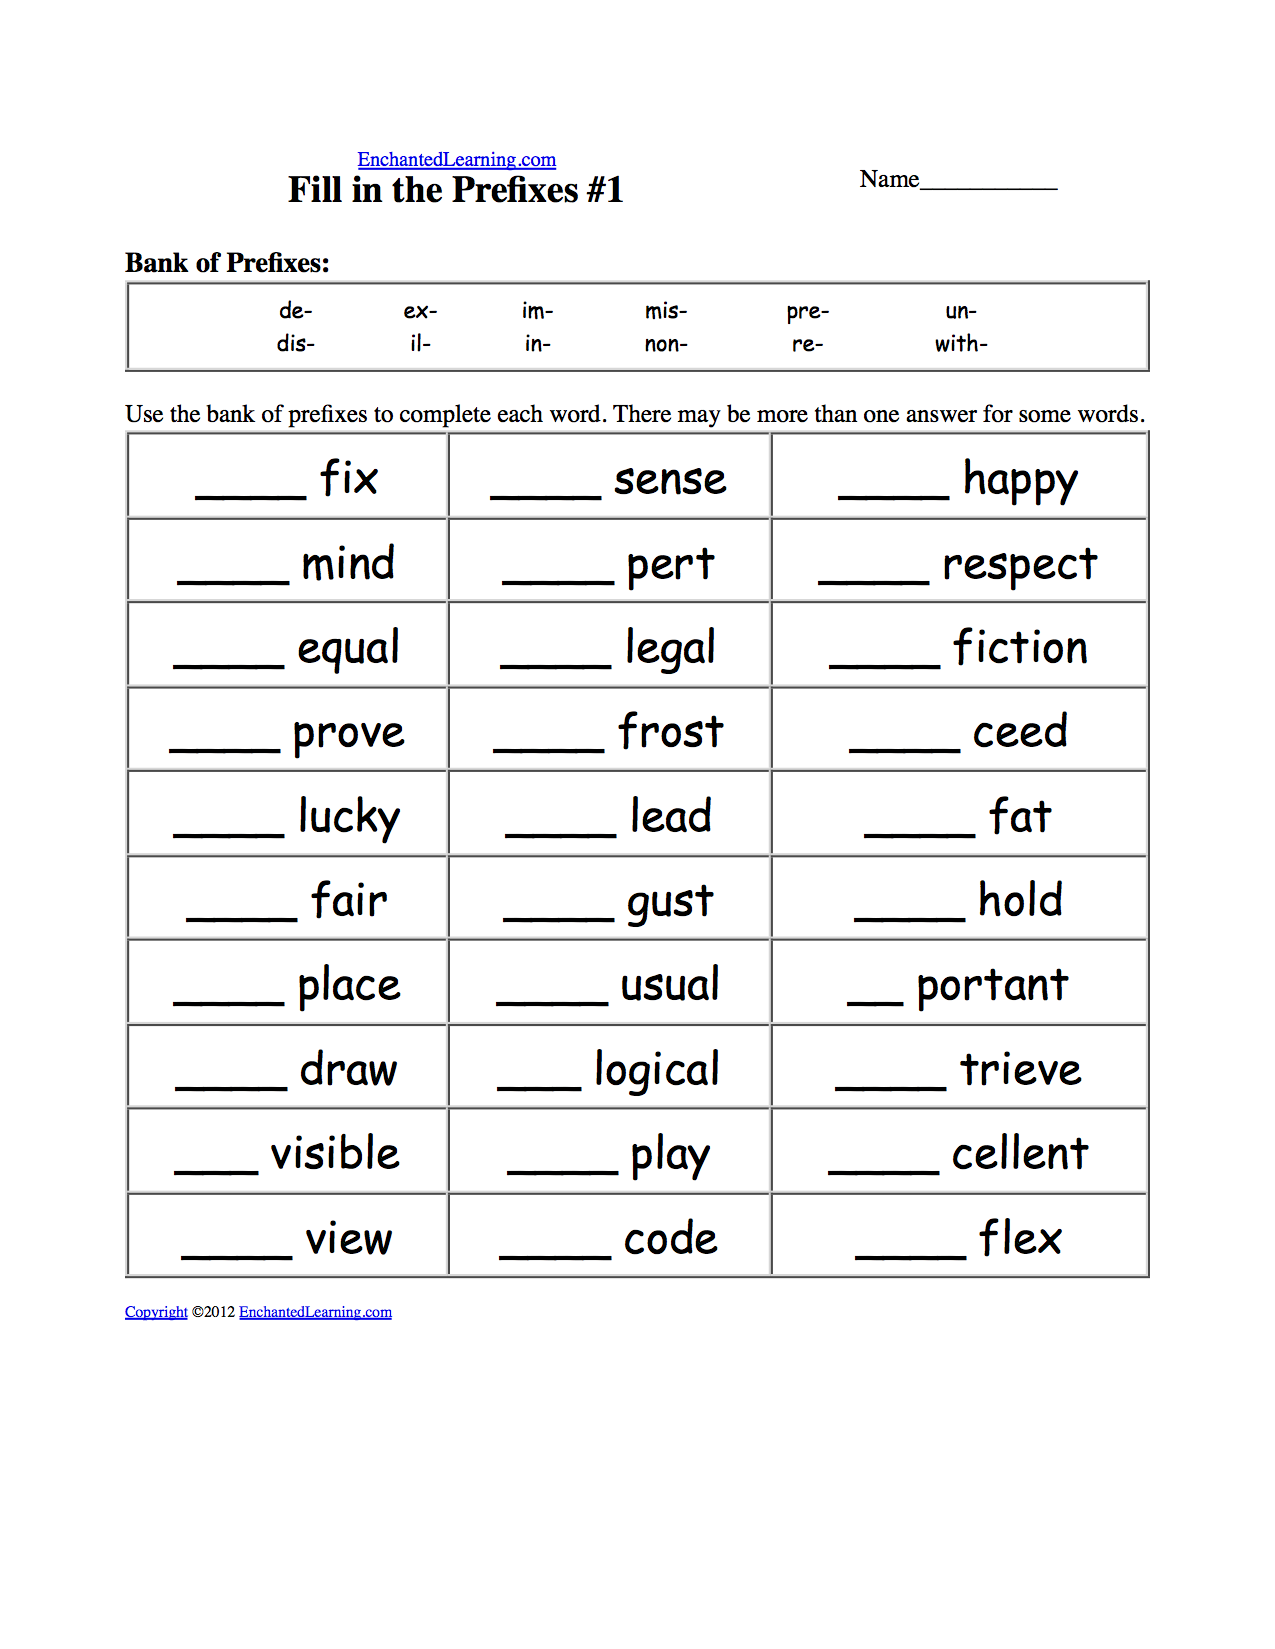 Fill in the Prefixes: Worksheets. EnchantedLearning.com